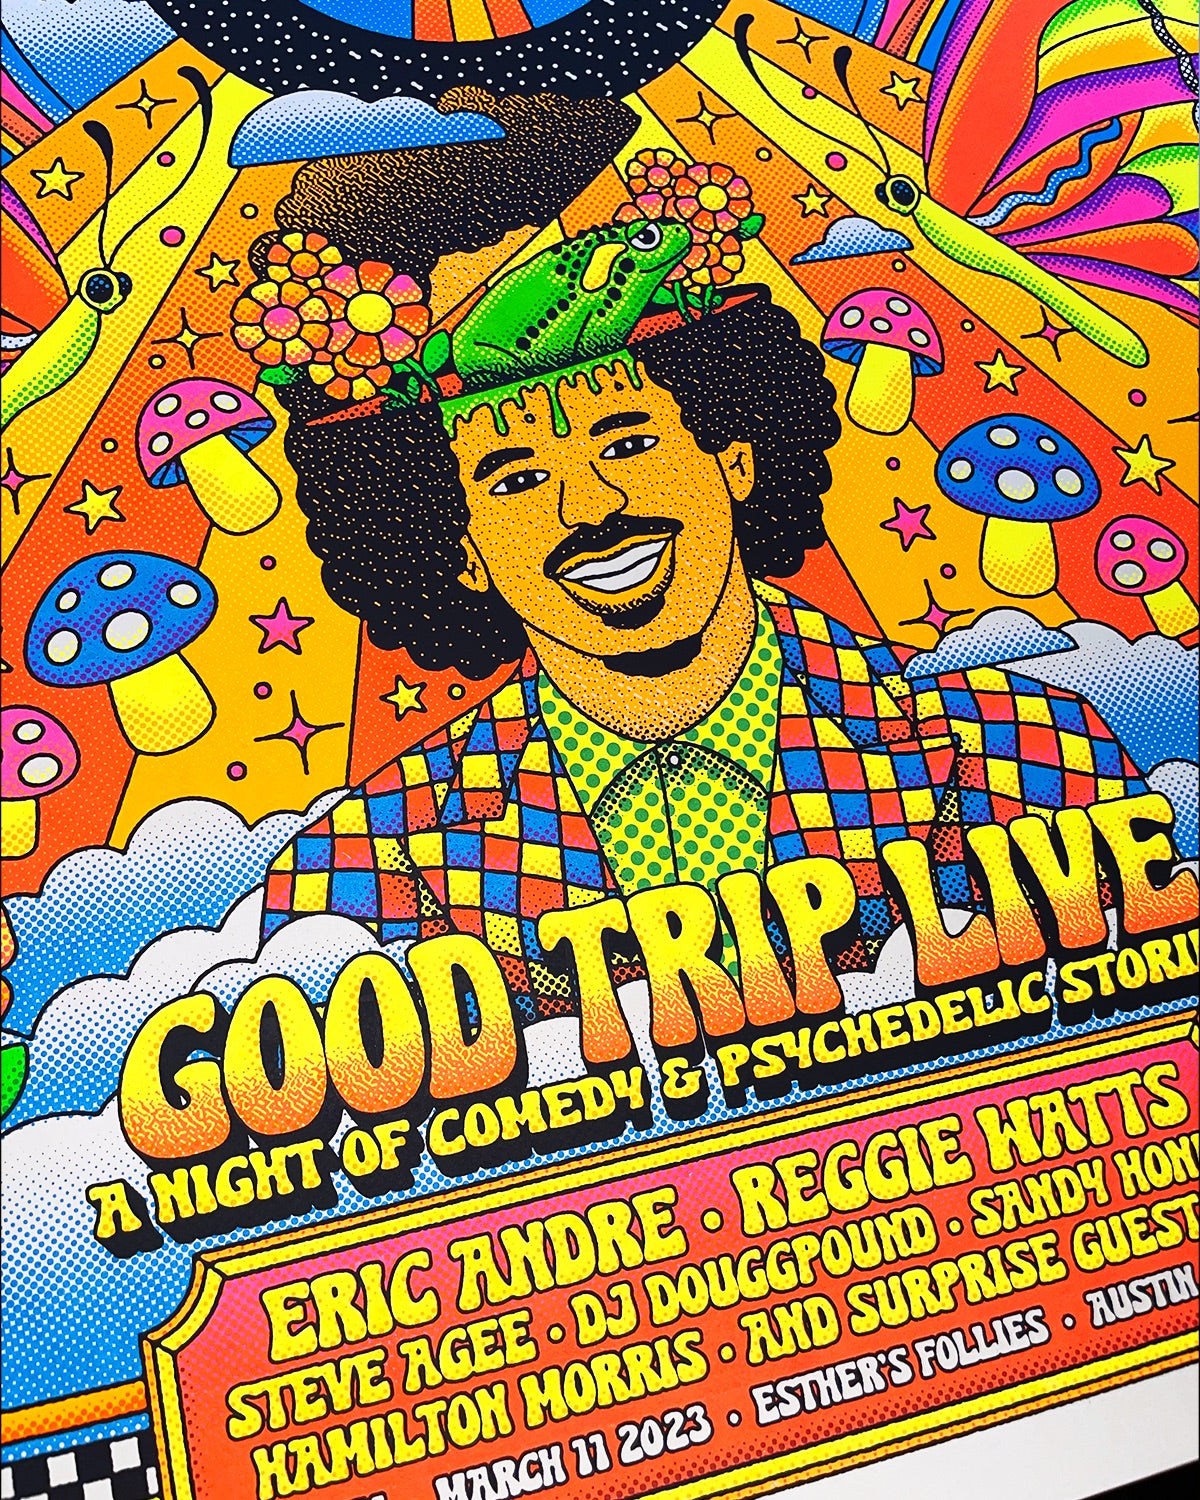 Good Trip Live X SXSW Blacklight Show Poster by Natemoonlife